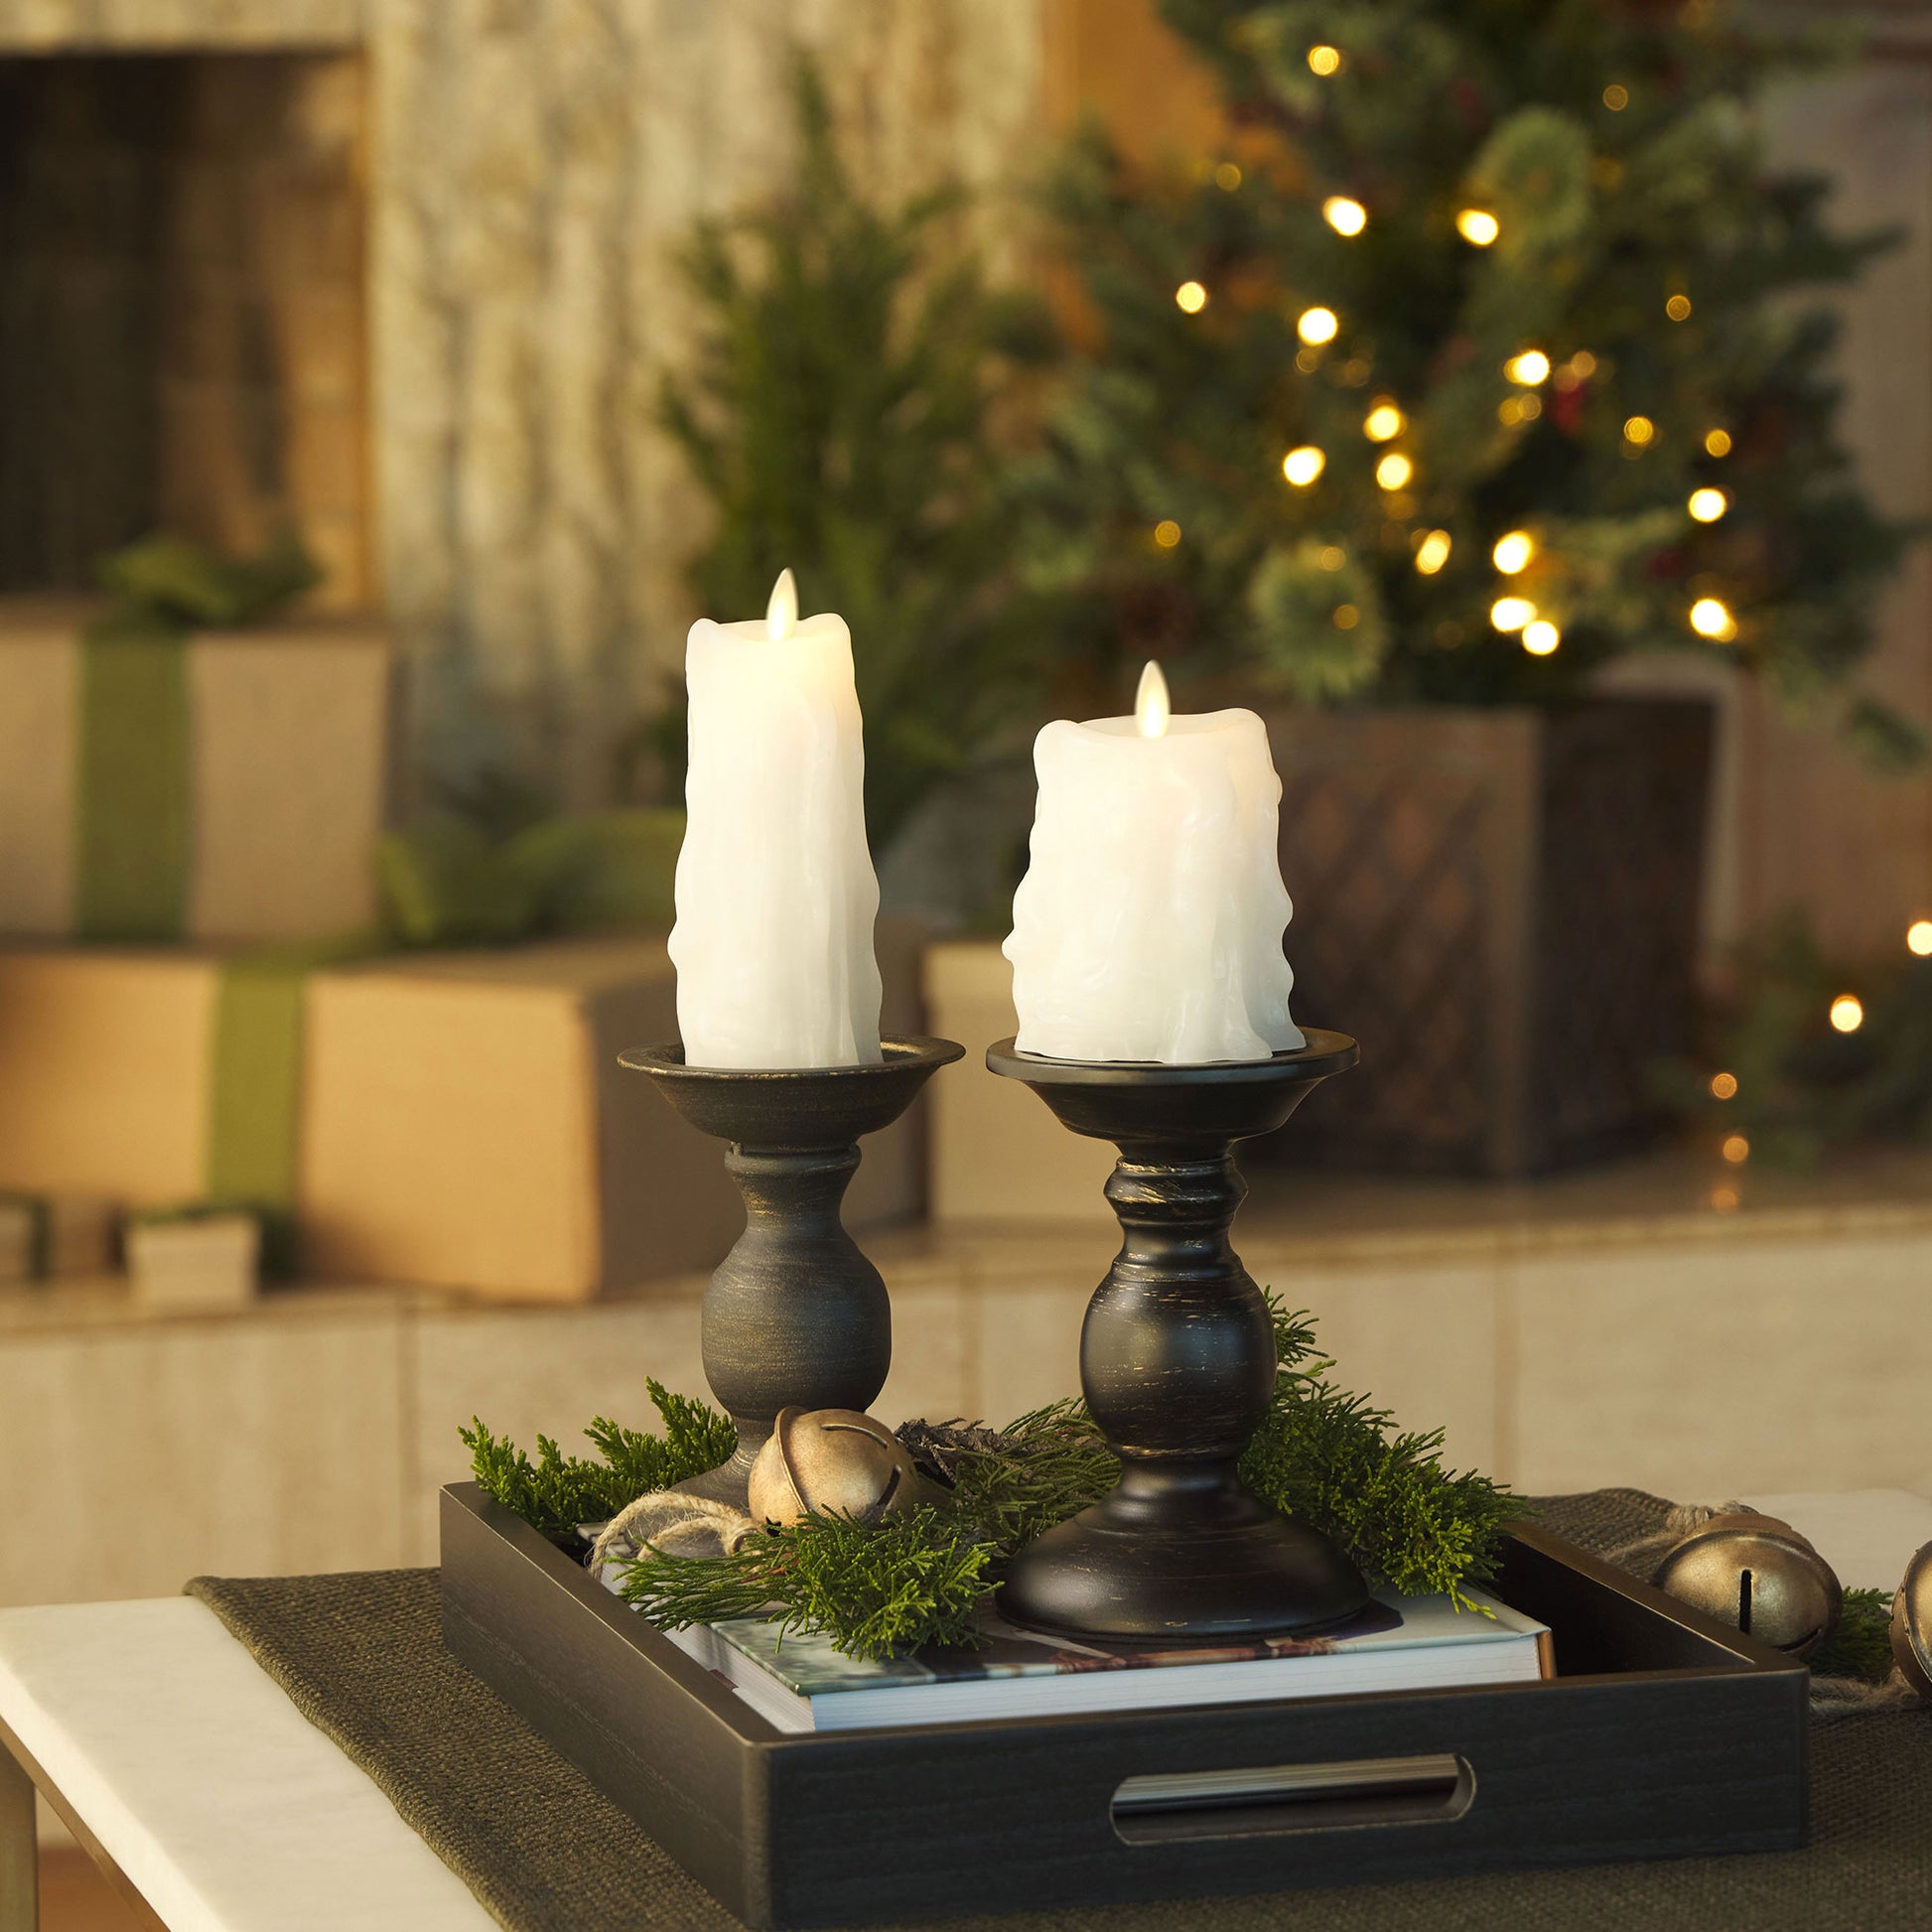 These Flameless Candles Add Vintage Nostalgia To The Christmas Tree